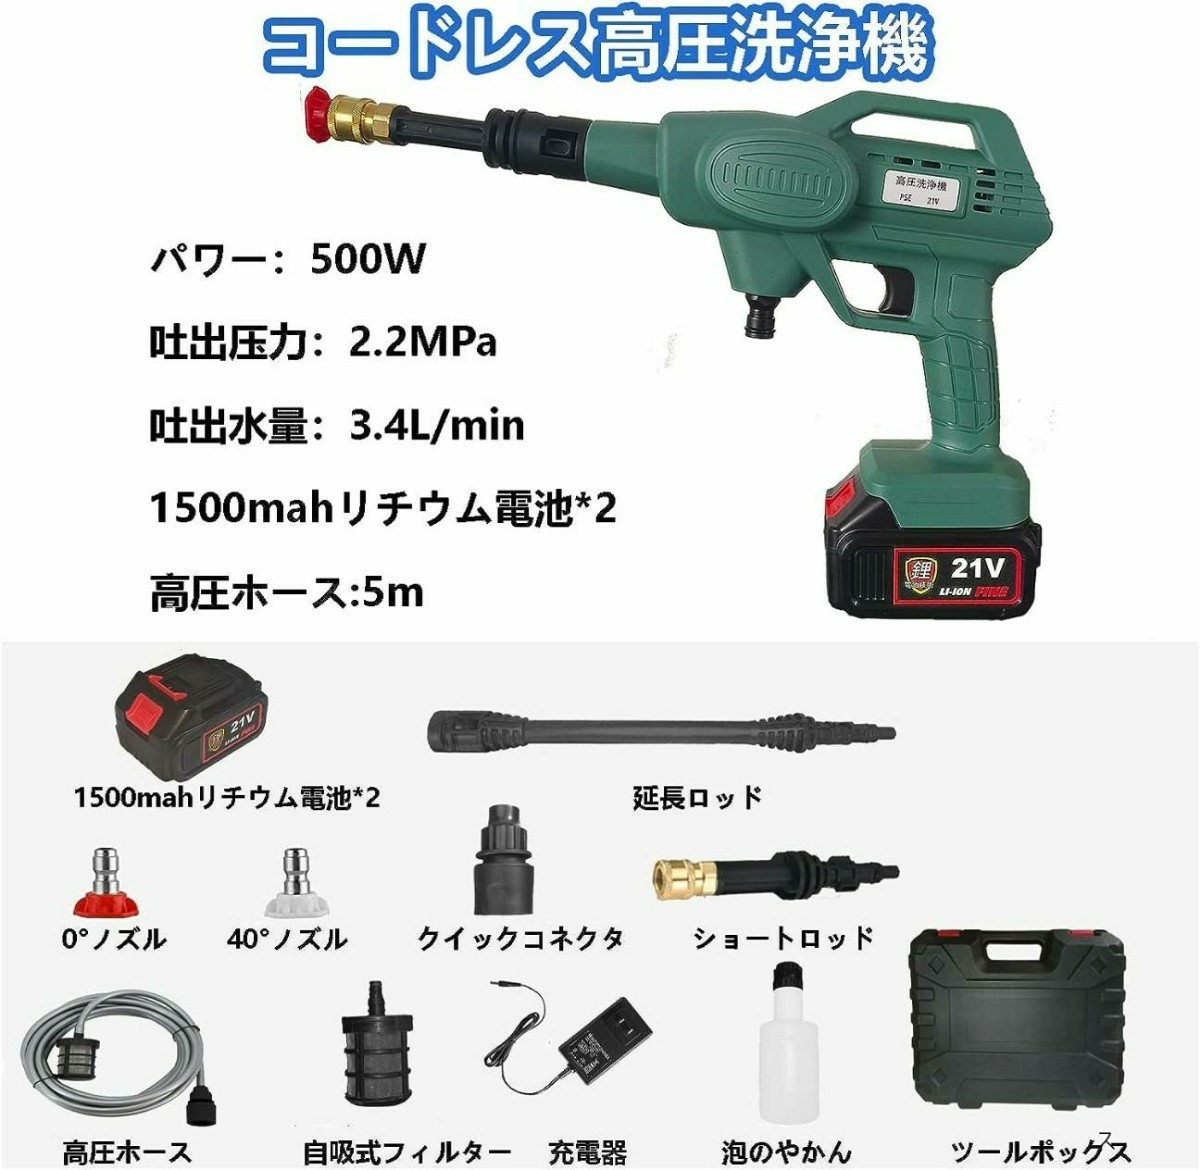  free shipping new goods high pressure washer cordless Makita interchangeable BL1860 etc. correspondence battery 2 piece charge adapter special case full set new system receipt possible 